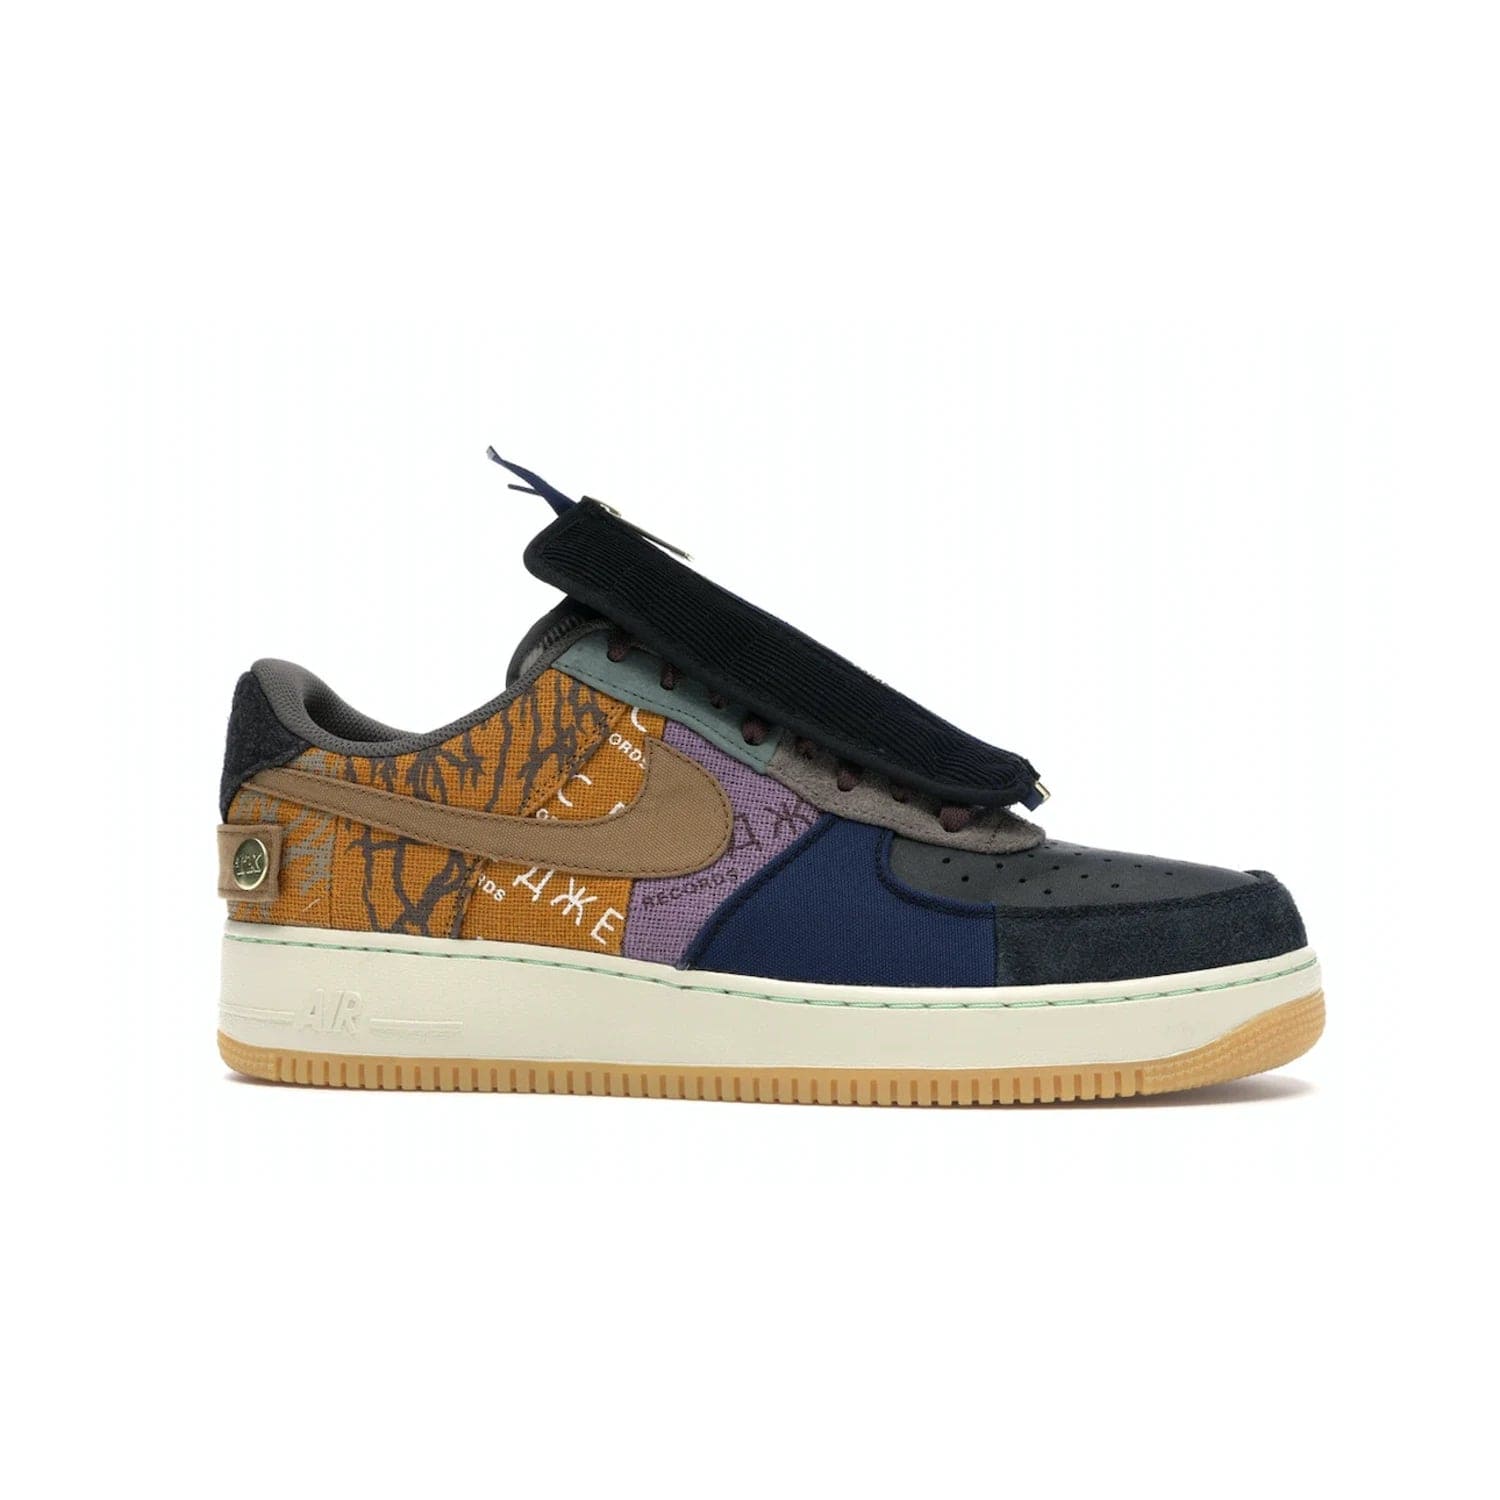 Nike Air Force 1 Low Travis Scott Cactus Jack - Image 2 - Only at www.BallersClubKickz.com - The Nike Air Force 1 Low Travis Scott Cactus Jack features a unique, multi-colored patchwork upper with muted bronze and fossil accents. Includes detachable lace cover, brass zipper, and Cactus Jack insignias. A sail midsole, gum rubber outsole complete the eye-catching design. Perfect for comfort and style with unexpected touches of detail.